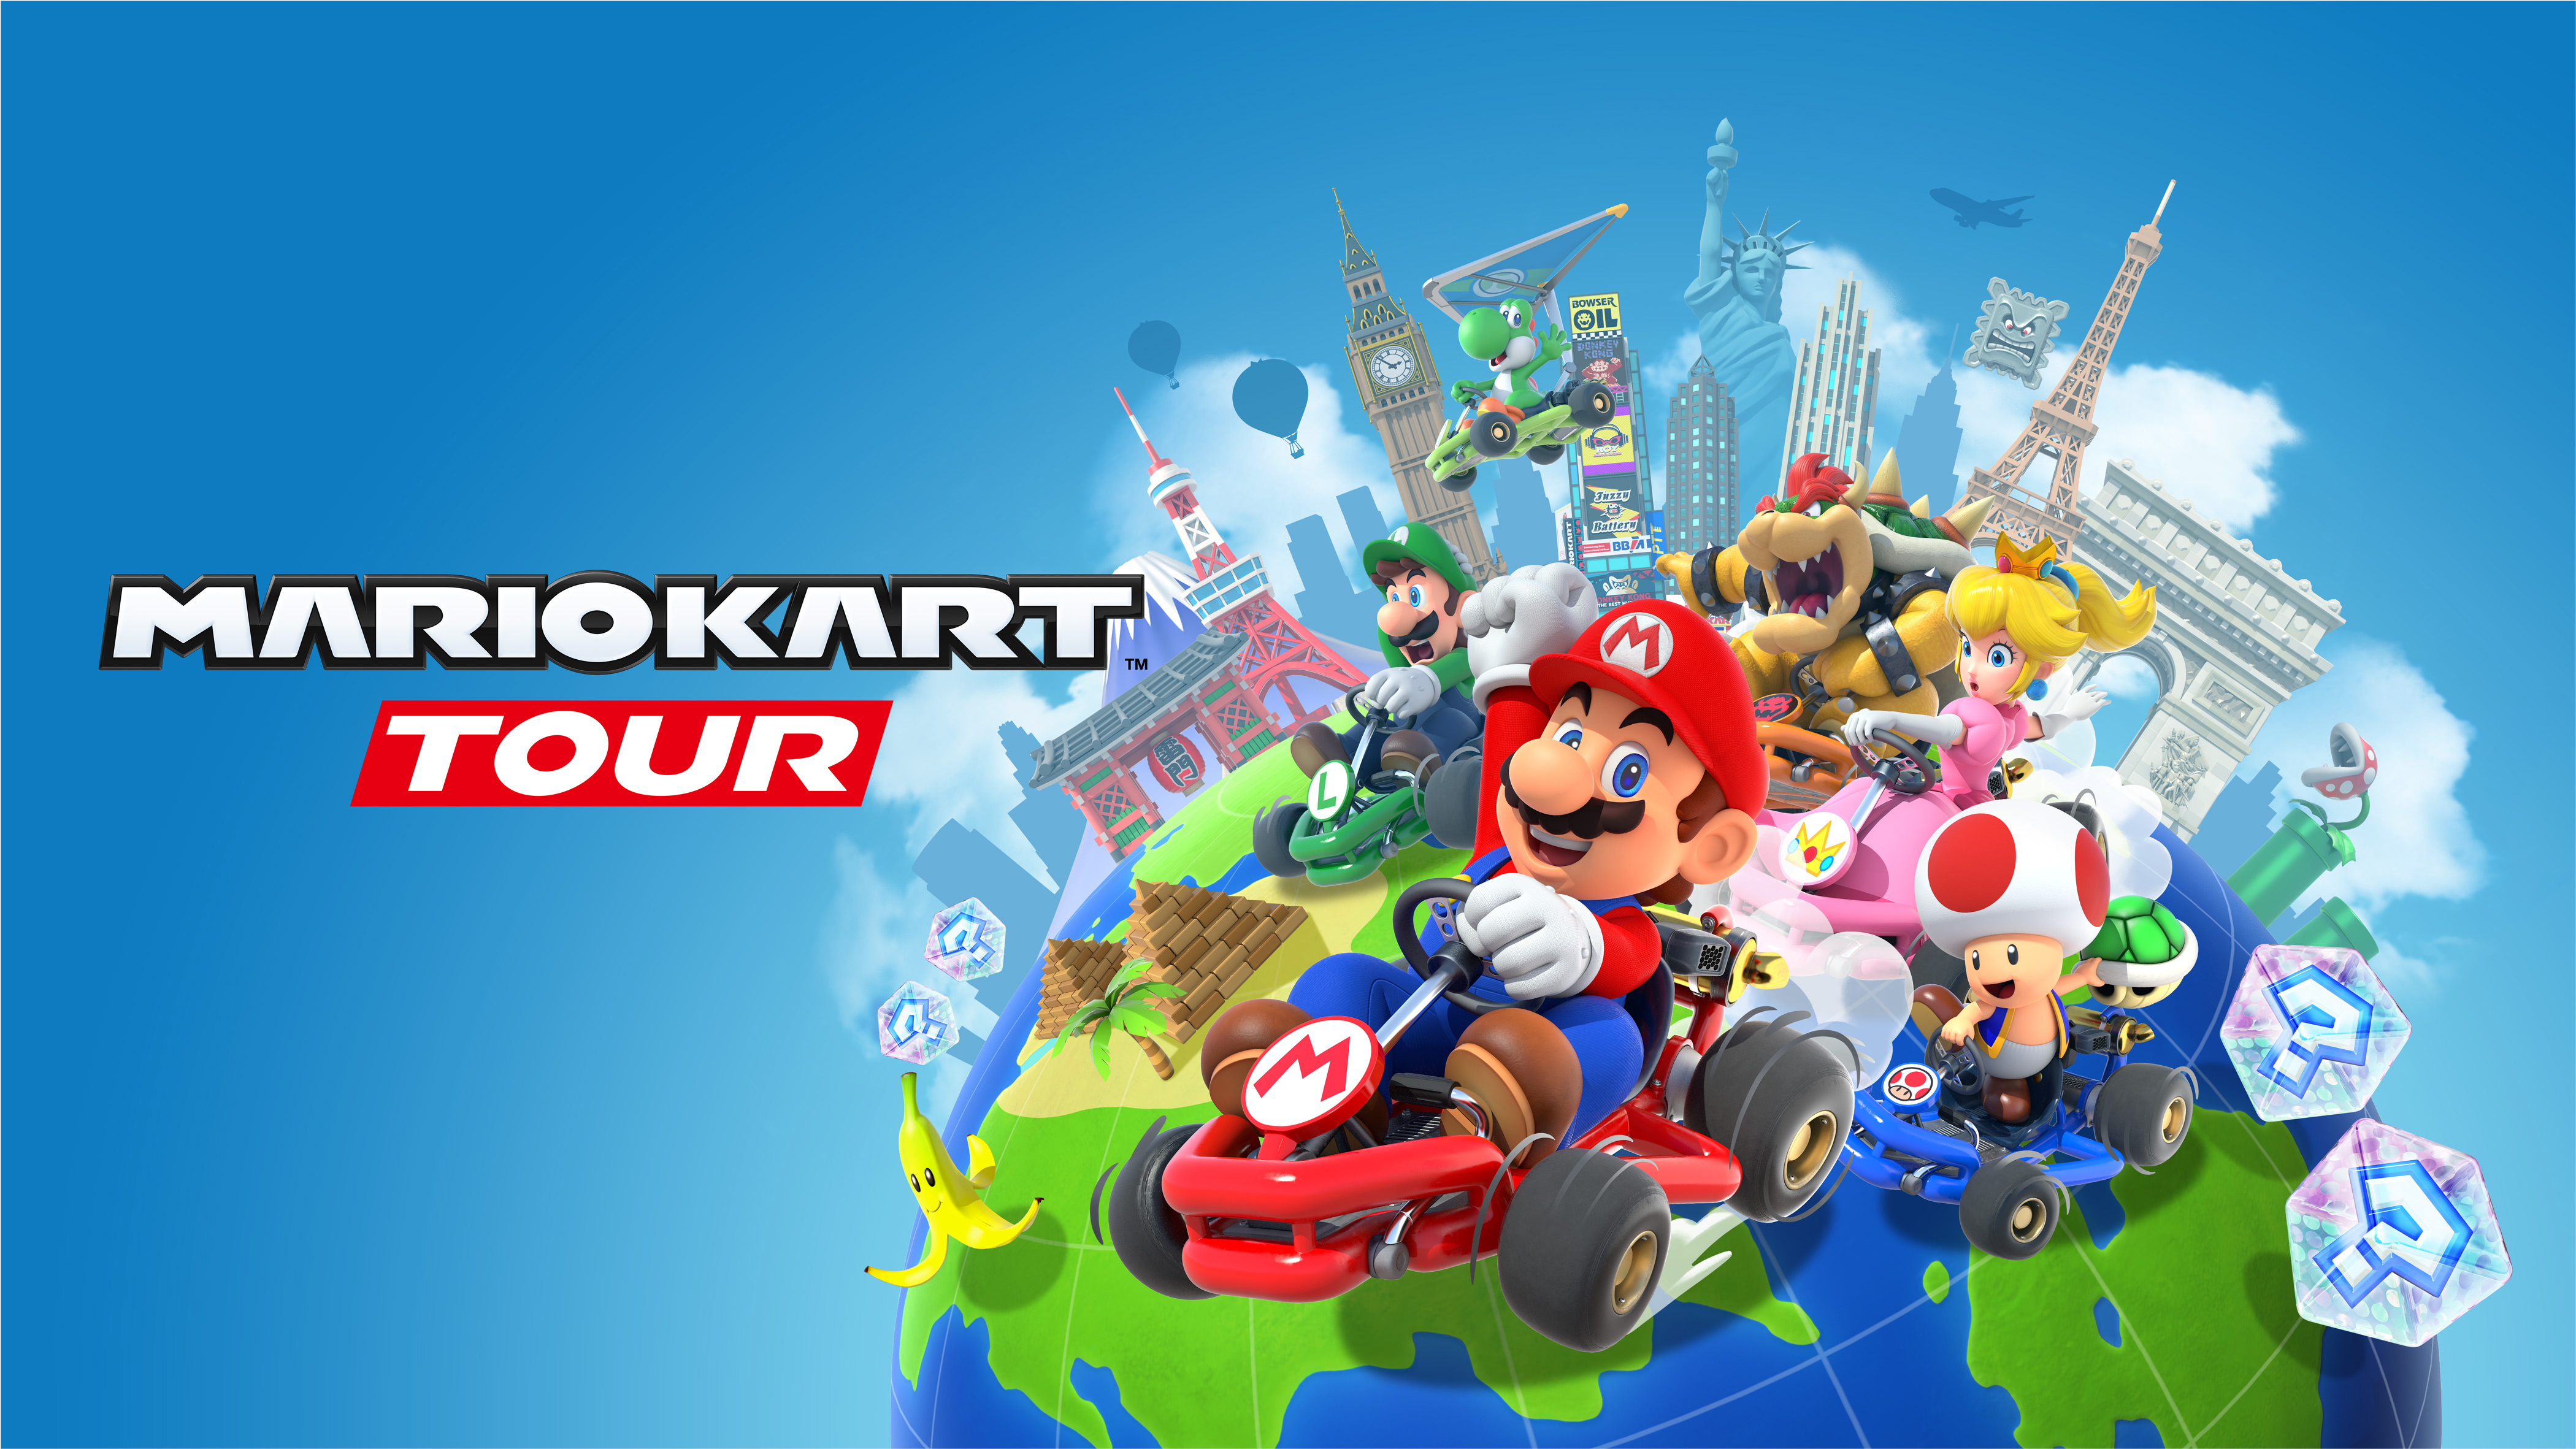 Mario Kart Tour Races Onto Ios And Android Devices On Sept 25 Business Wire